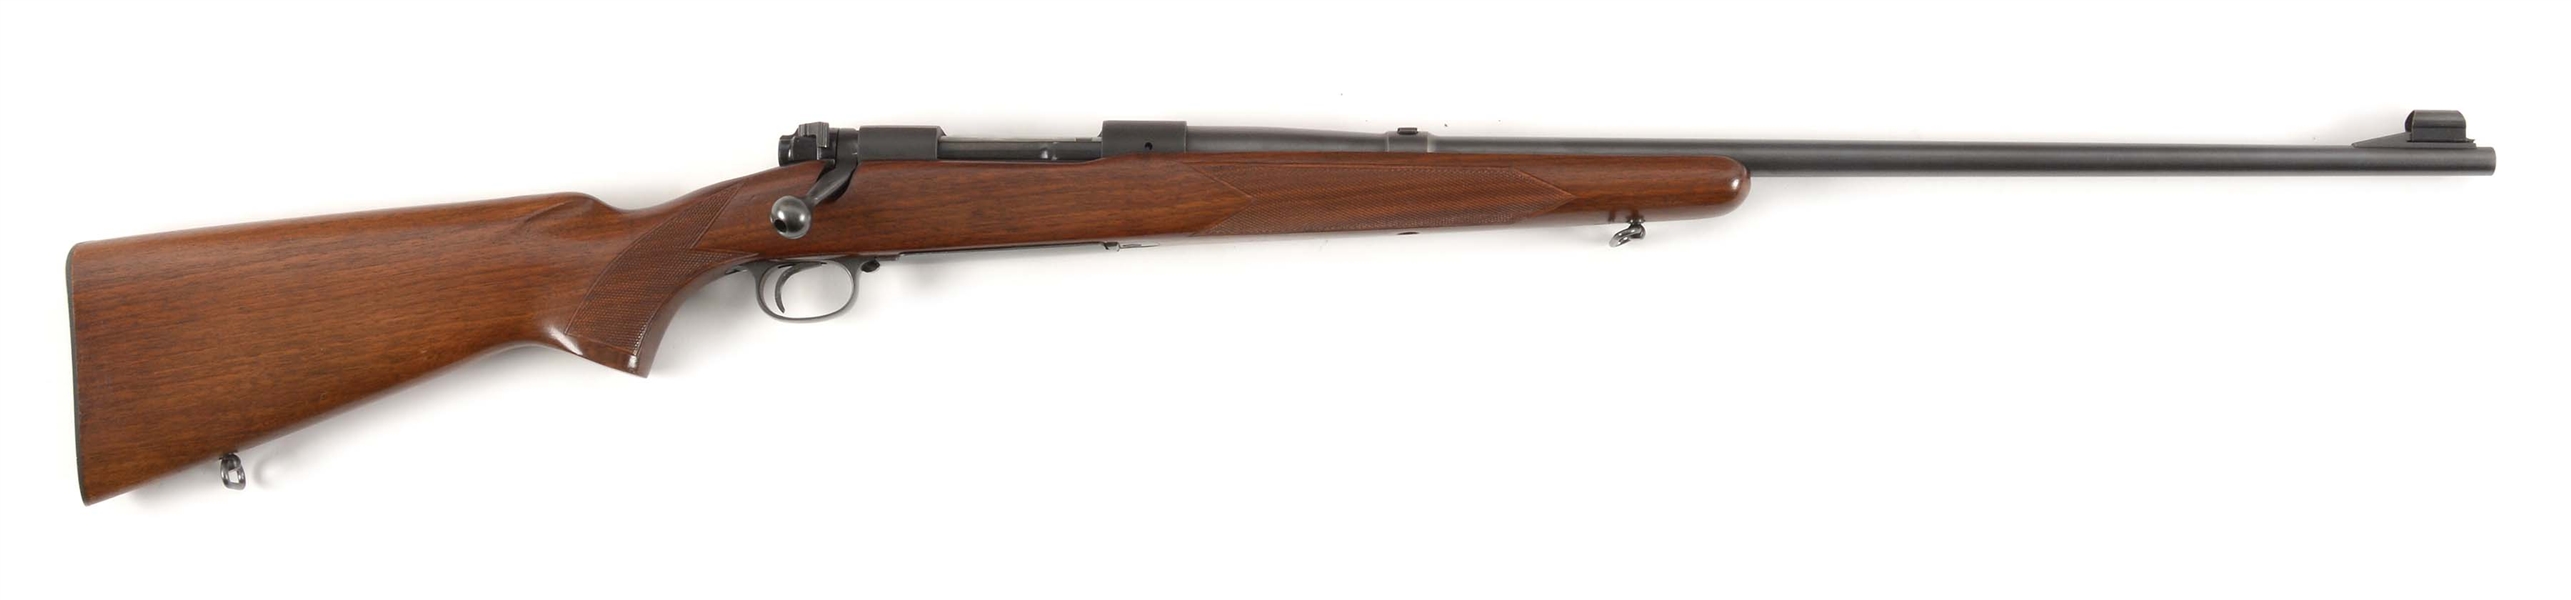 (C) WINCHESTER 70 BOLT ACTION RIFLE.